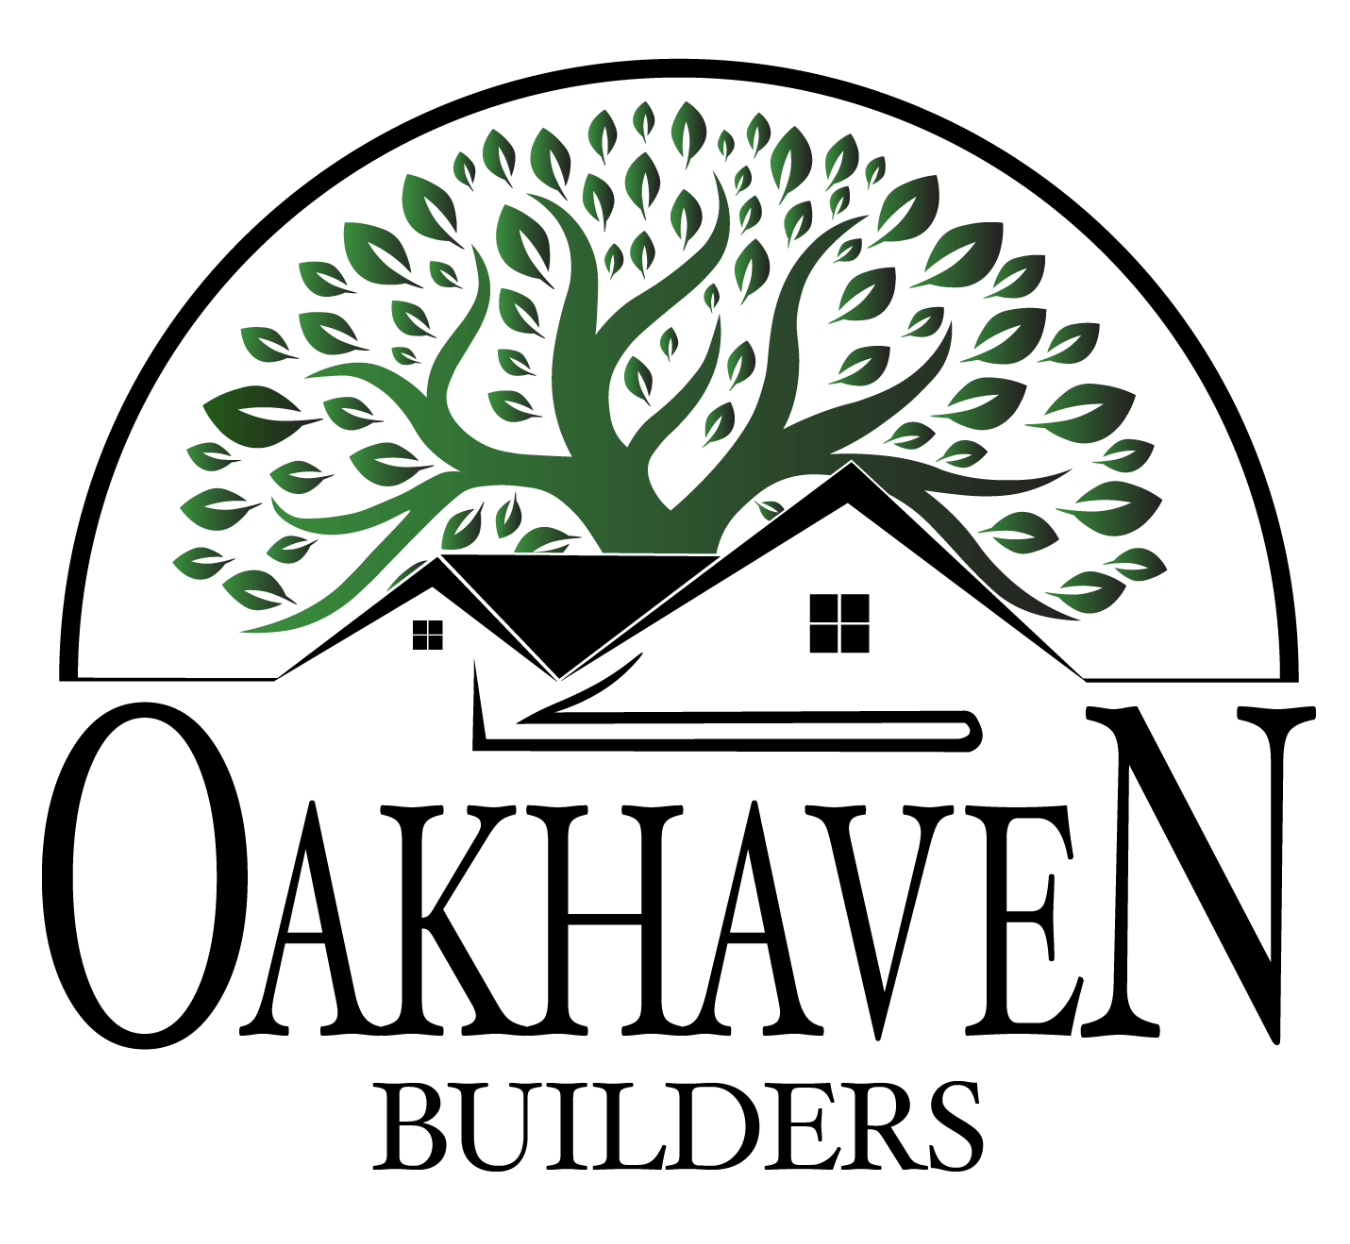 Oakhaven Builders Logo - Tree with house